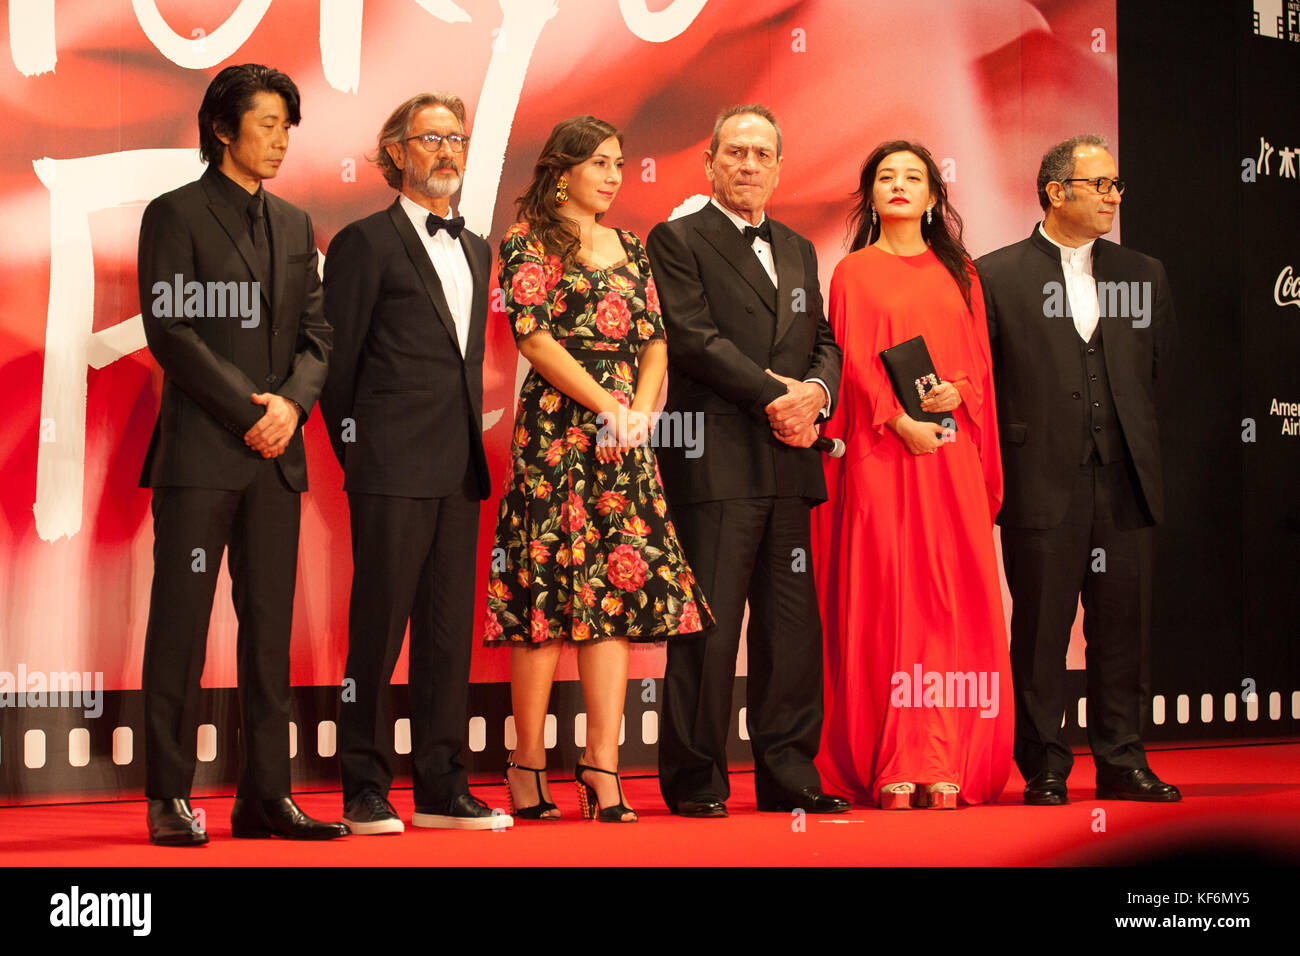 Members of the International Competition Jury, Masatoshi Nagase, Martin Provost, Victoria Jones, Tommy Lee Jones, Zhao Wei Reza Mirkarimi appears on the opening red carpet for The 30th Tokyo International Film Festival in Roppongi on October 25th, 2017, in Tokyo, Japan. The festival runs from October 25th to November 3rd at venues in Tokyo. Credit: Michael Steinebach/AFLO/Alamy Live News Stock Photo